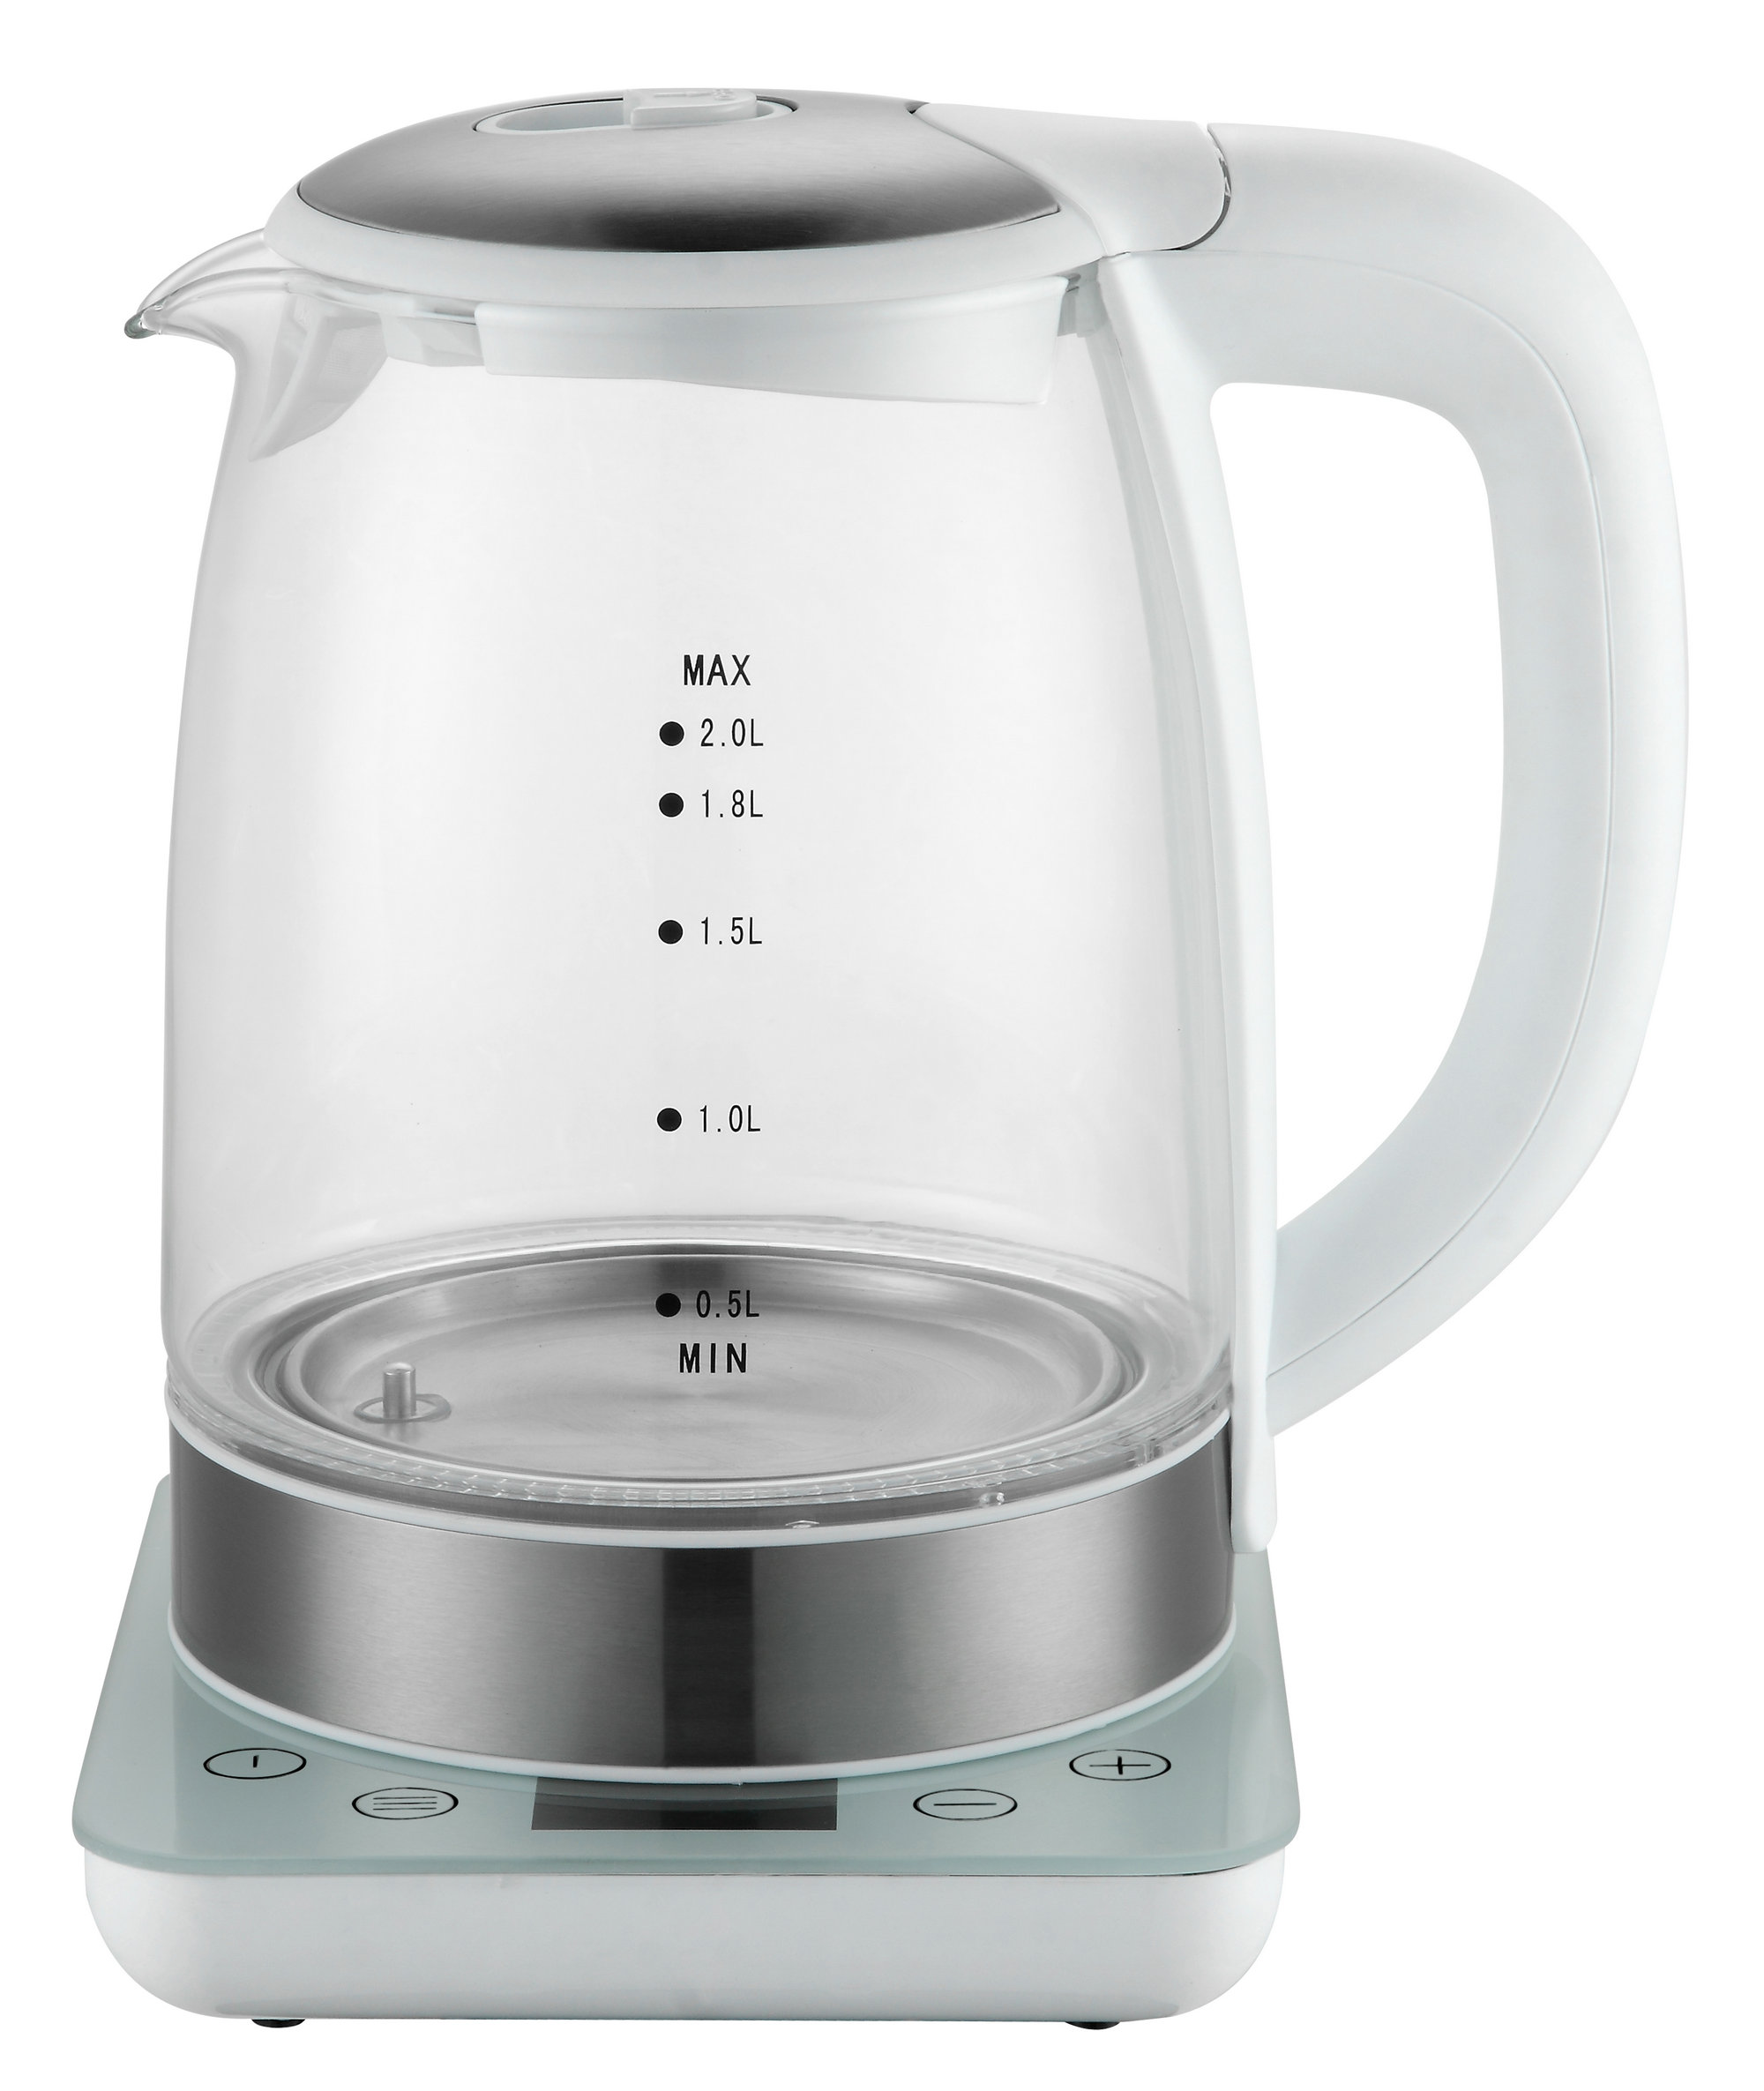 2.0L digital control glass kettle with LED display